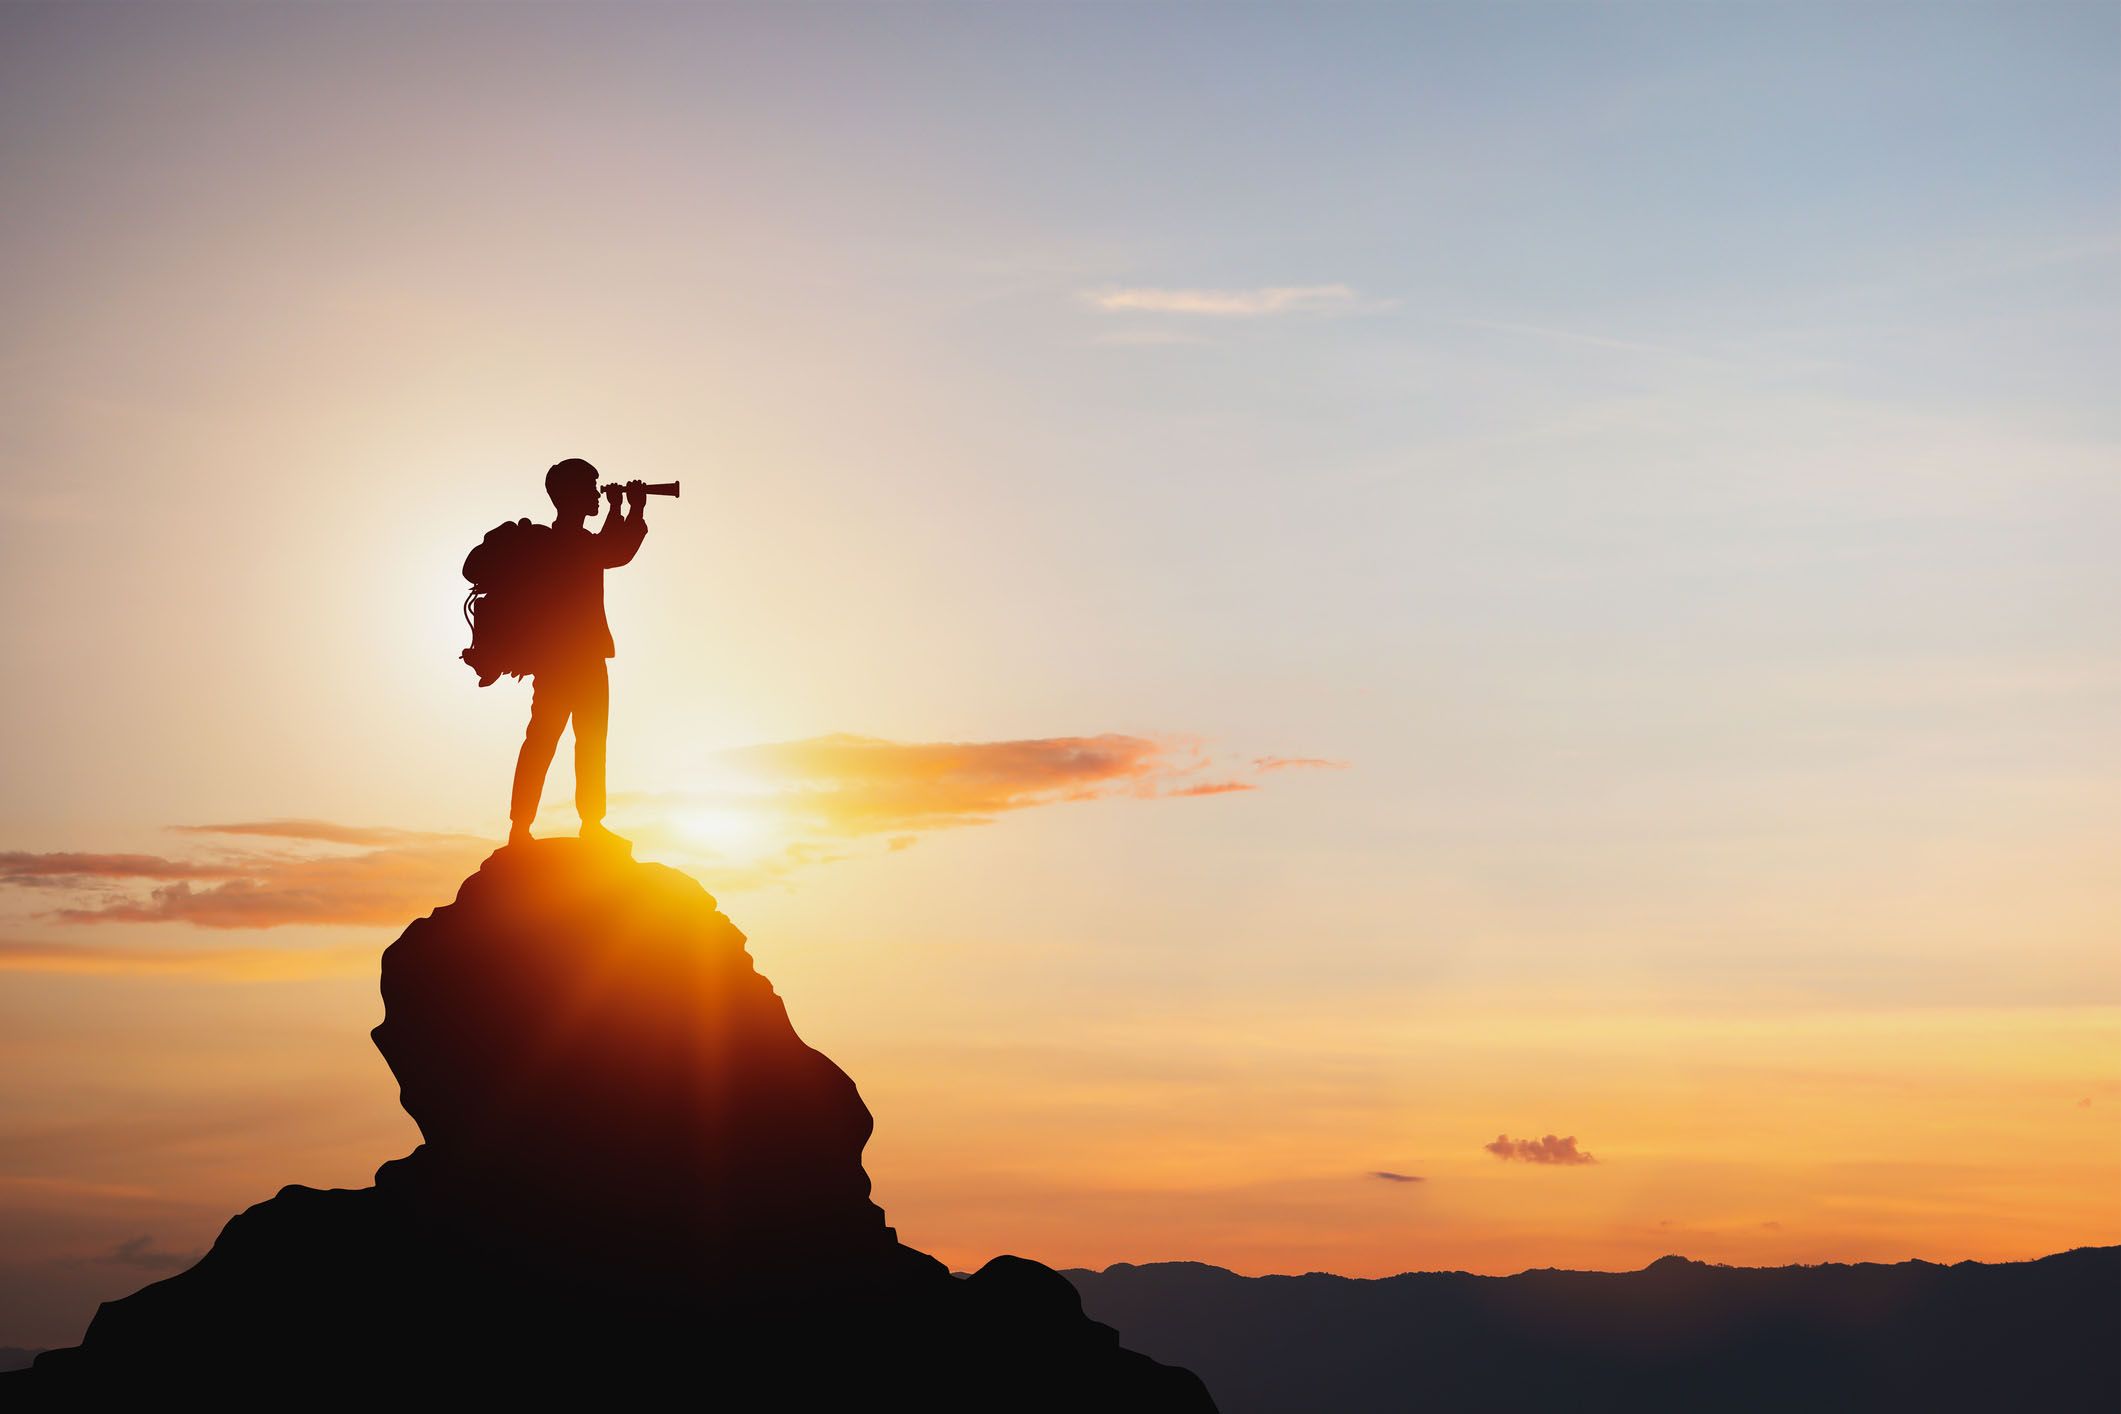 A person with a backpack standing on a mountain peak holding a spyglass